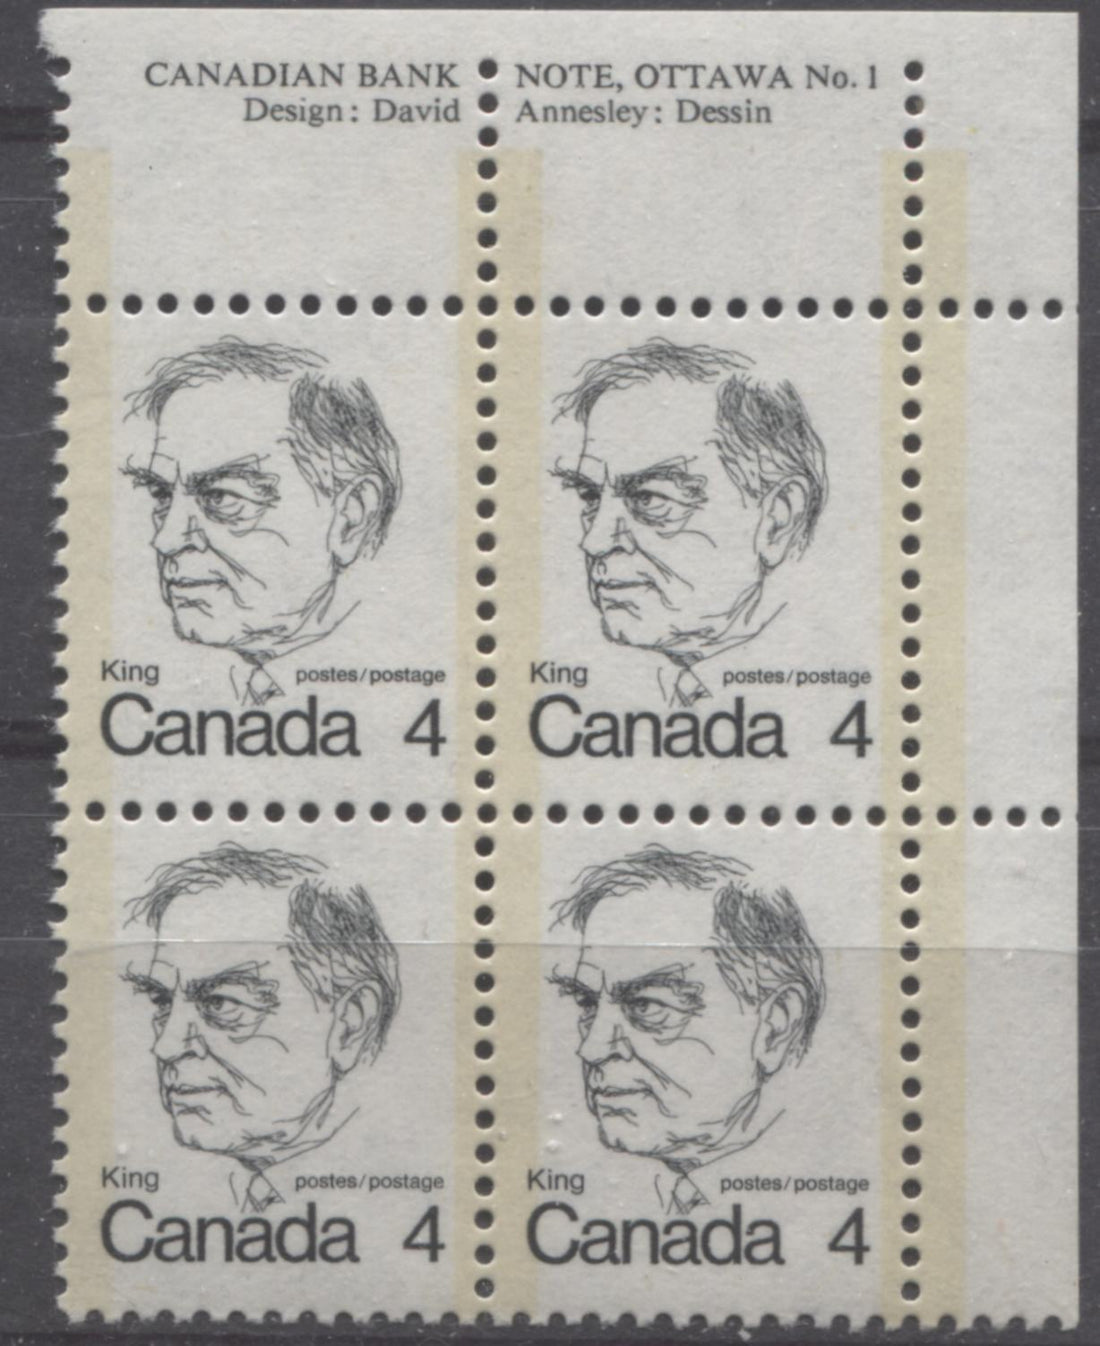 The Perforations on the 1972-1978 Caricature Issue